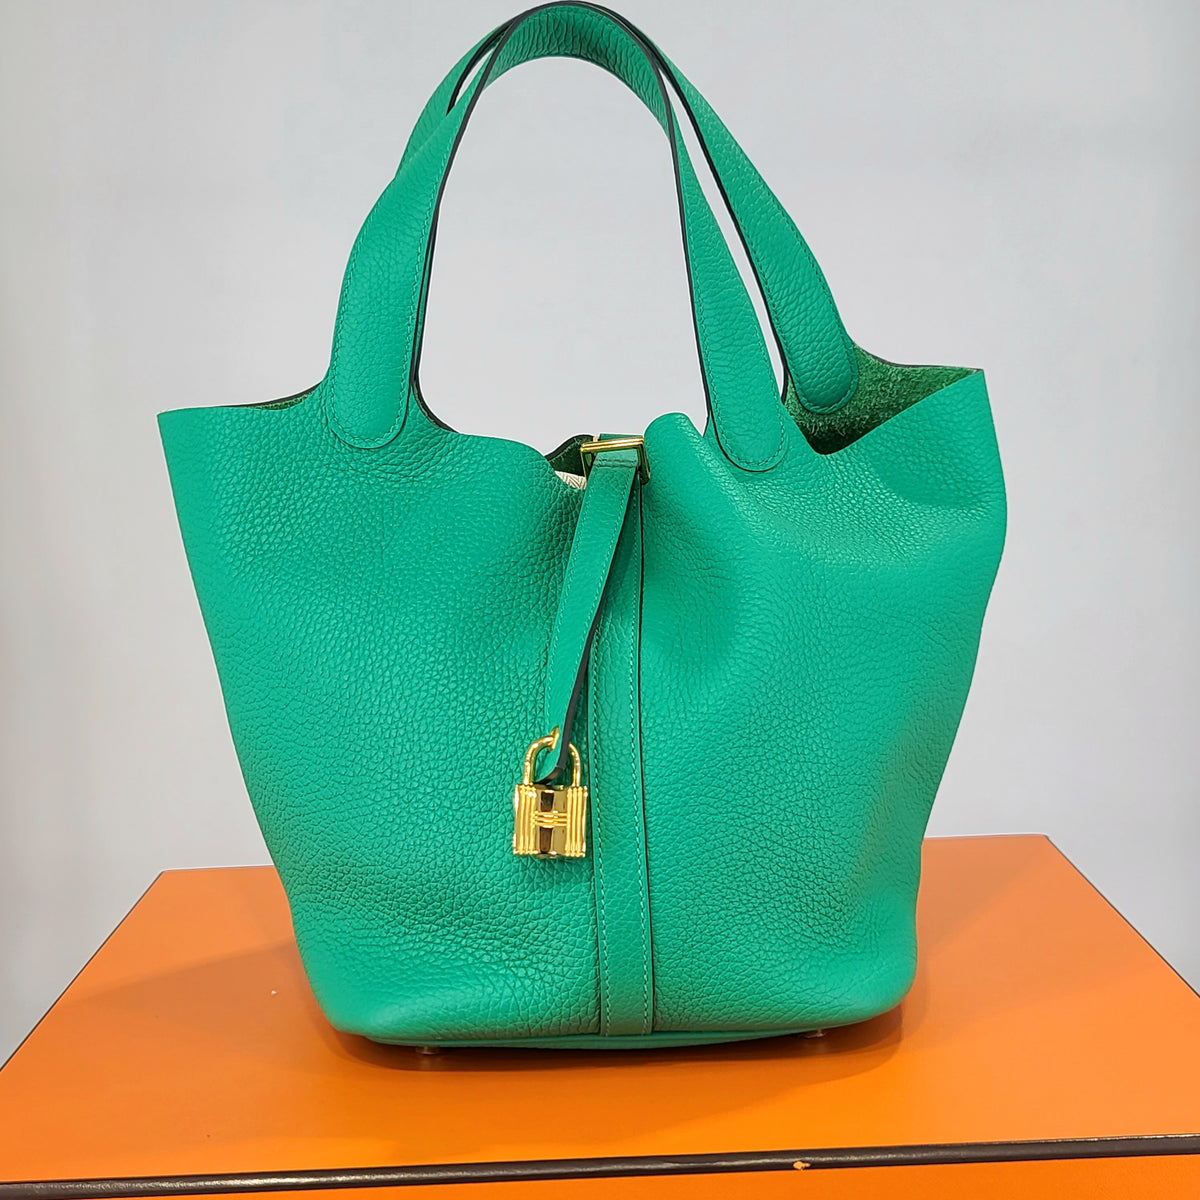 Hermes Picotin Lock Bag Clemence Leather Gold Hardware In Mintgreen